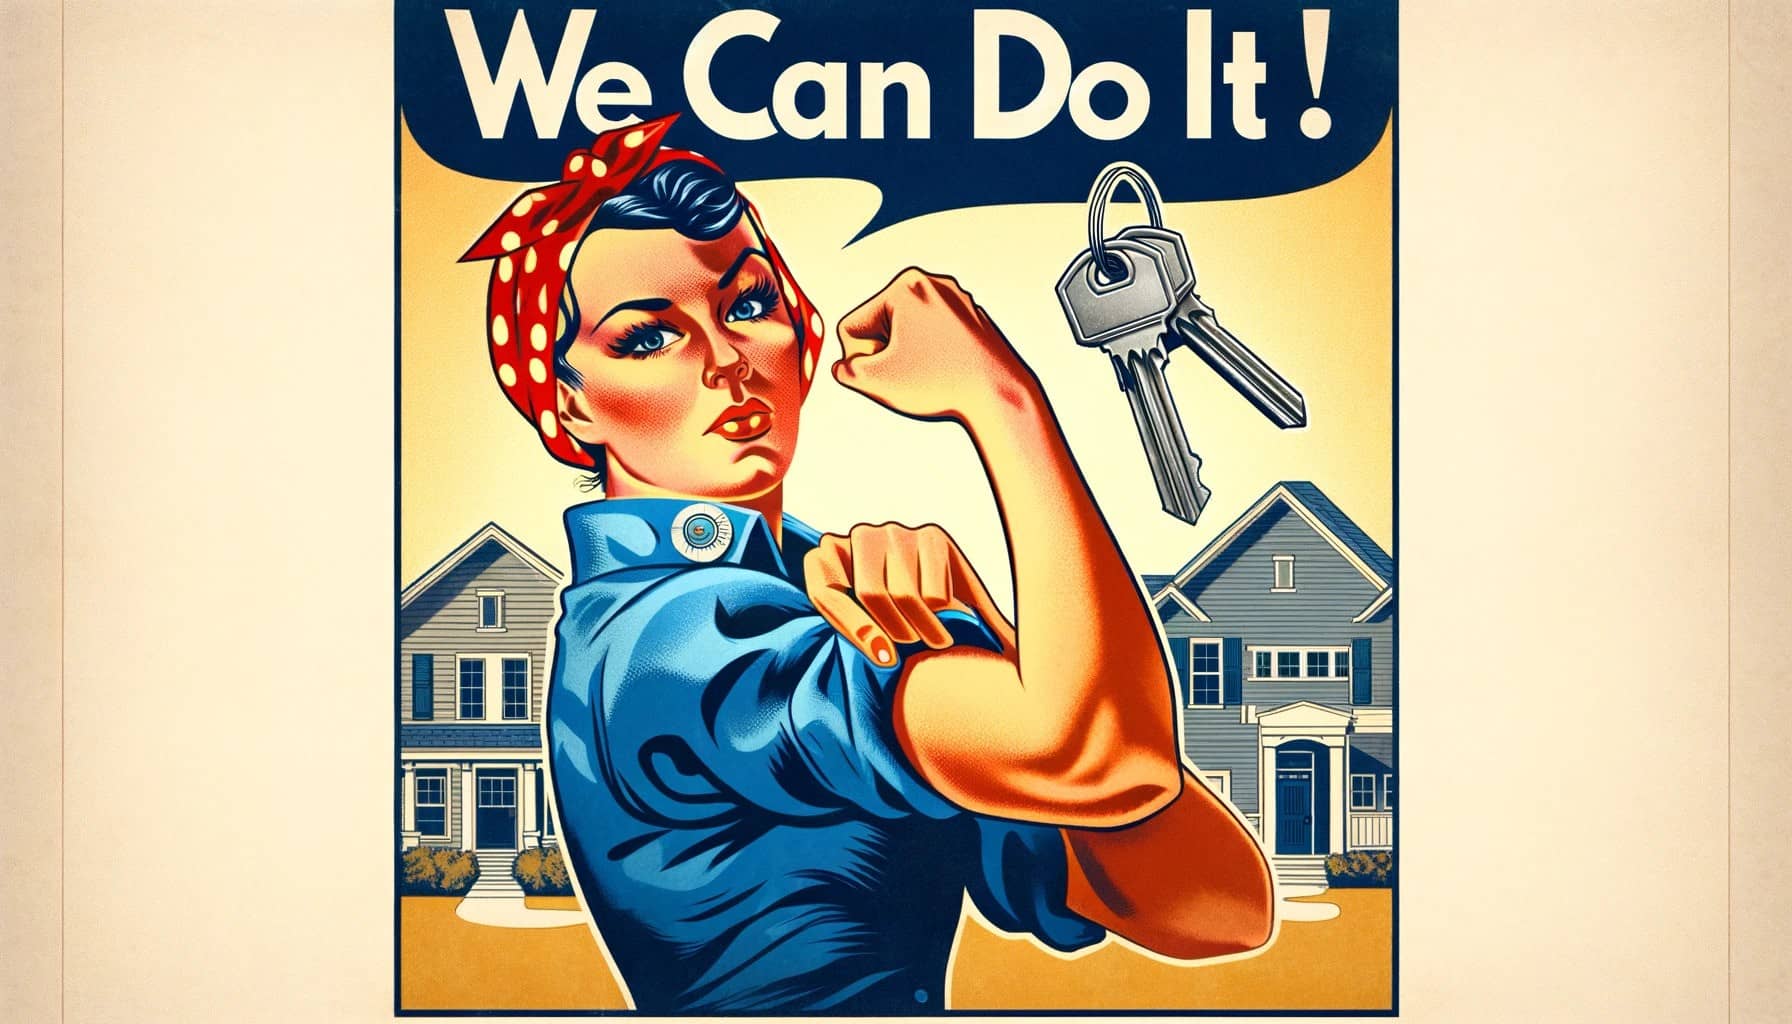 An image inspired by 'Rosie the Riveter' and tailored to the theme of a woman homebuyer. It features a single woman in the iconic pose, holding keys to symbolize her homeownership, set against a stylized background representing the San Francisco housing market.